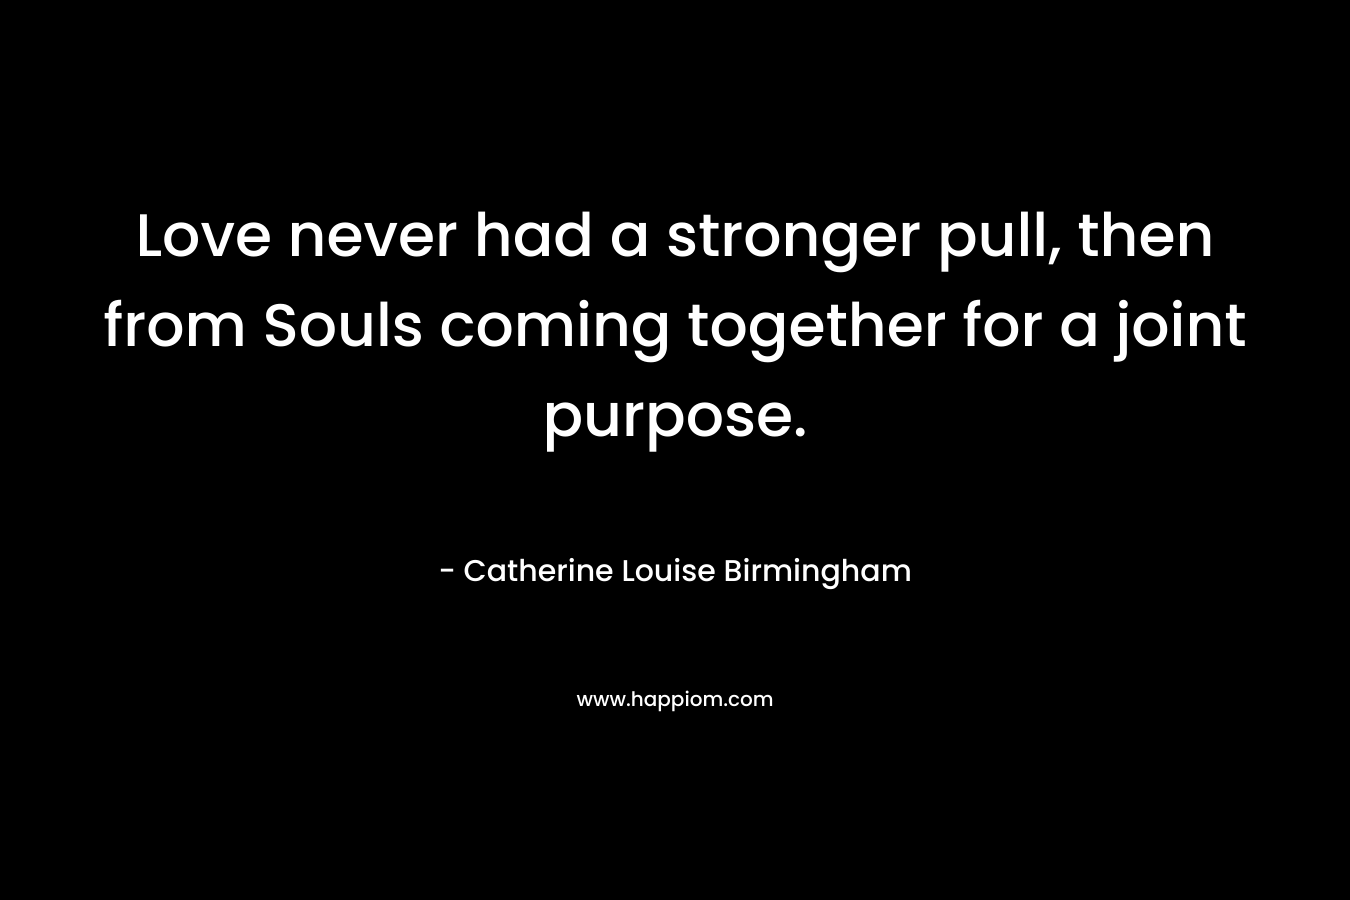 Love never had a stronger pull, then from Souls coming together for a joint purpose.